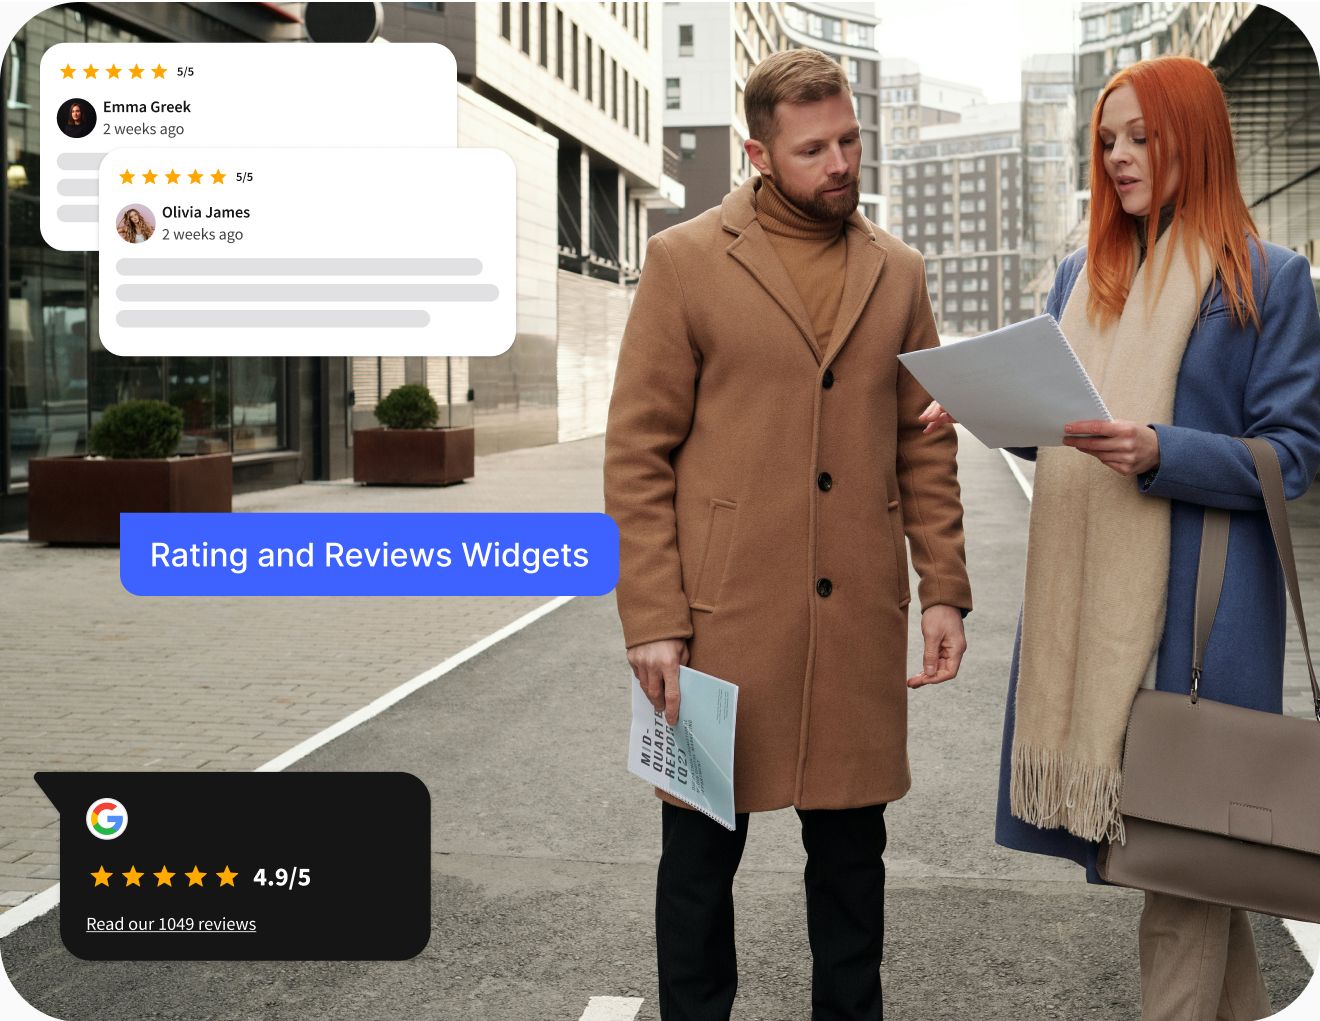 Customer rating and review widgets display